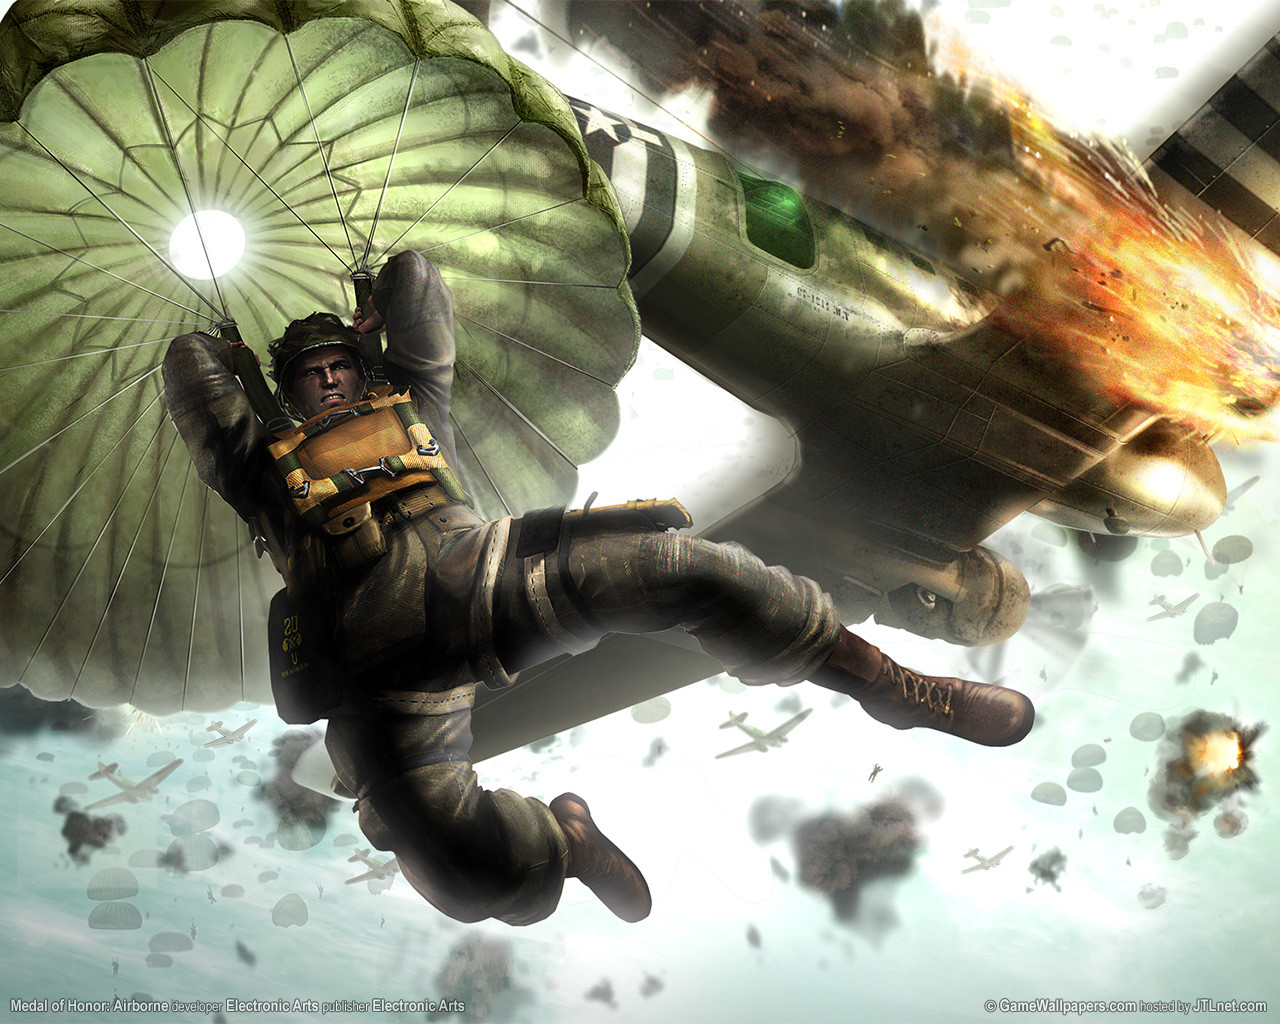 This Here Is Some Amazing Concept Art For Medal Of Honor Airborne